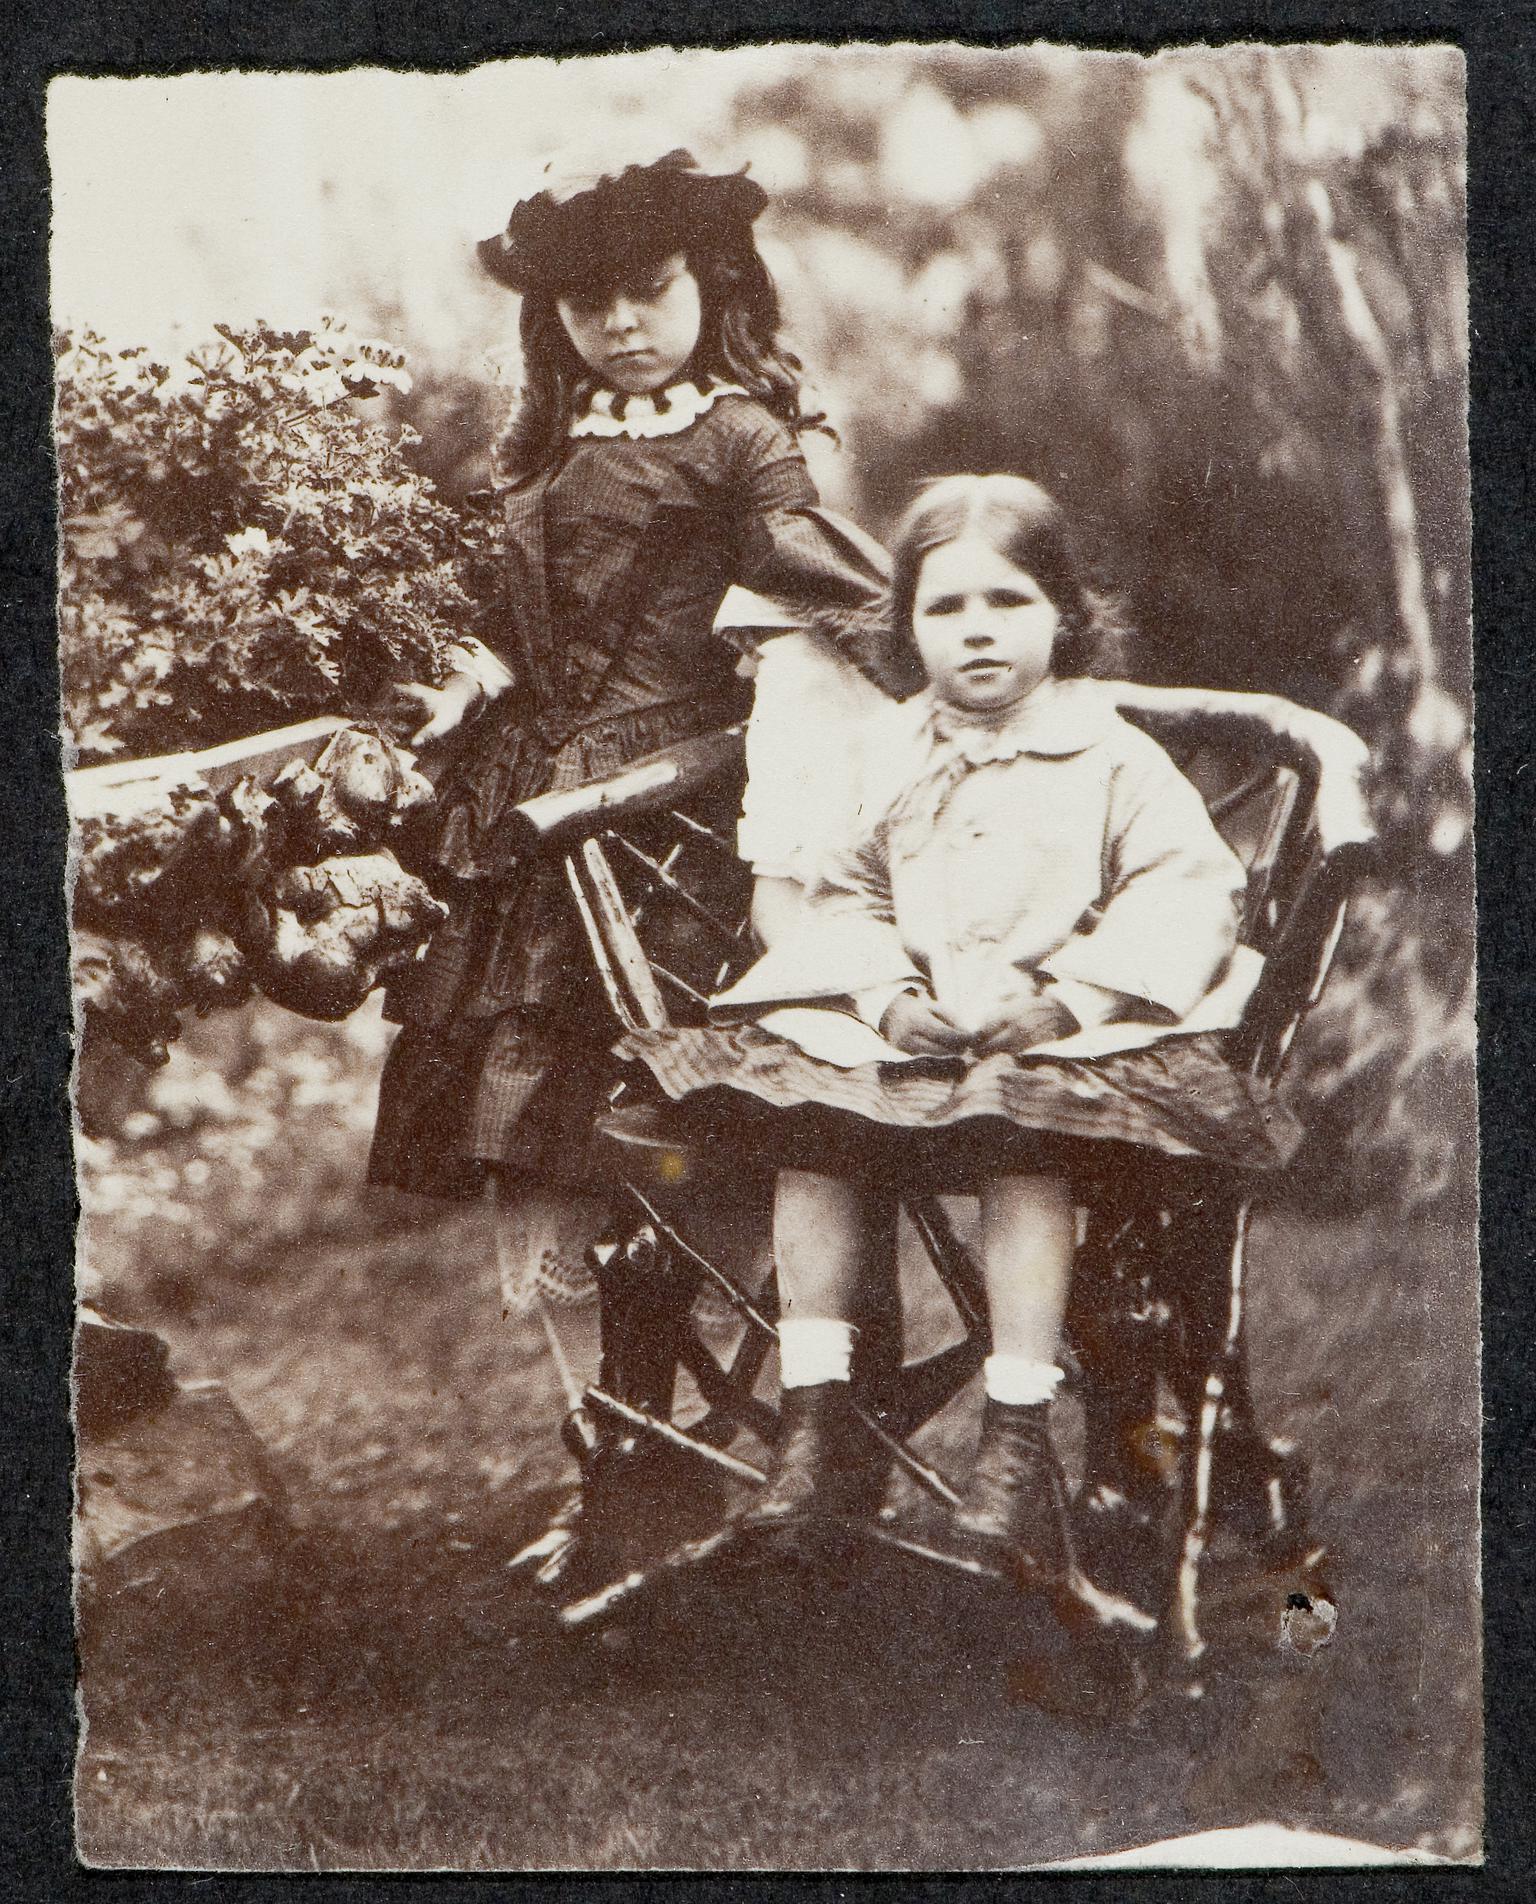 Minnie and other child, photograph